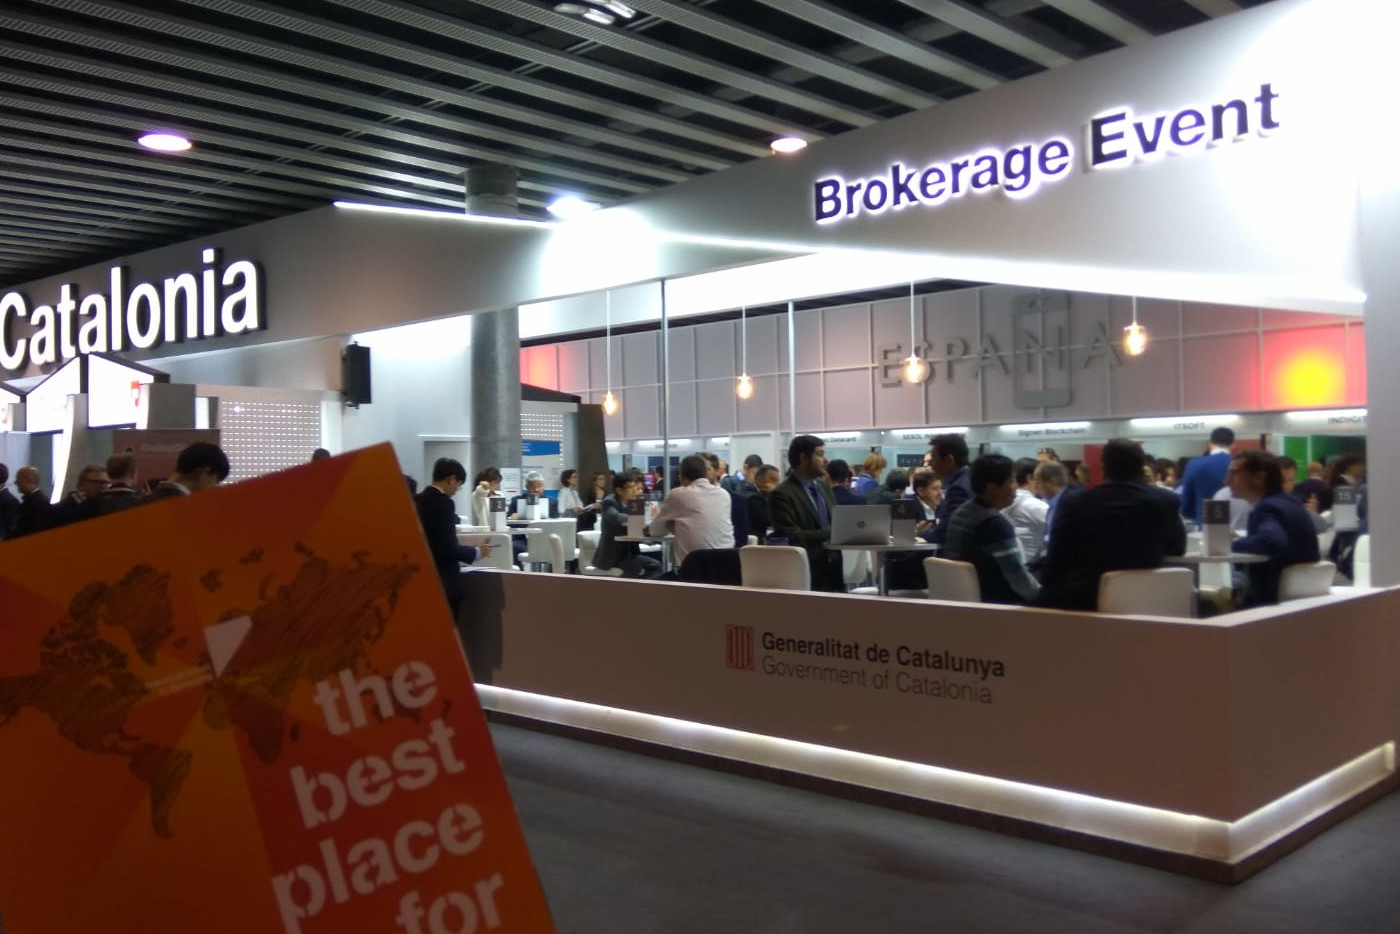 We Participate In The Brokerage Event Of The Mobile World Congress